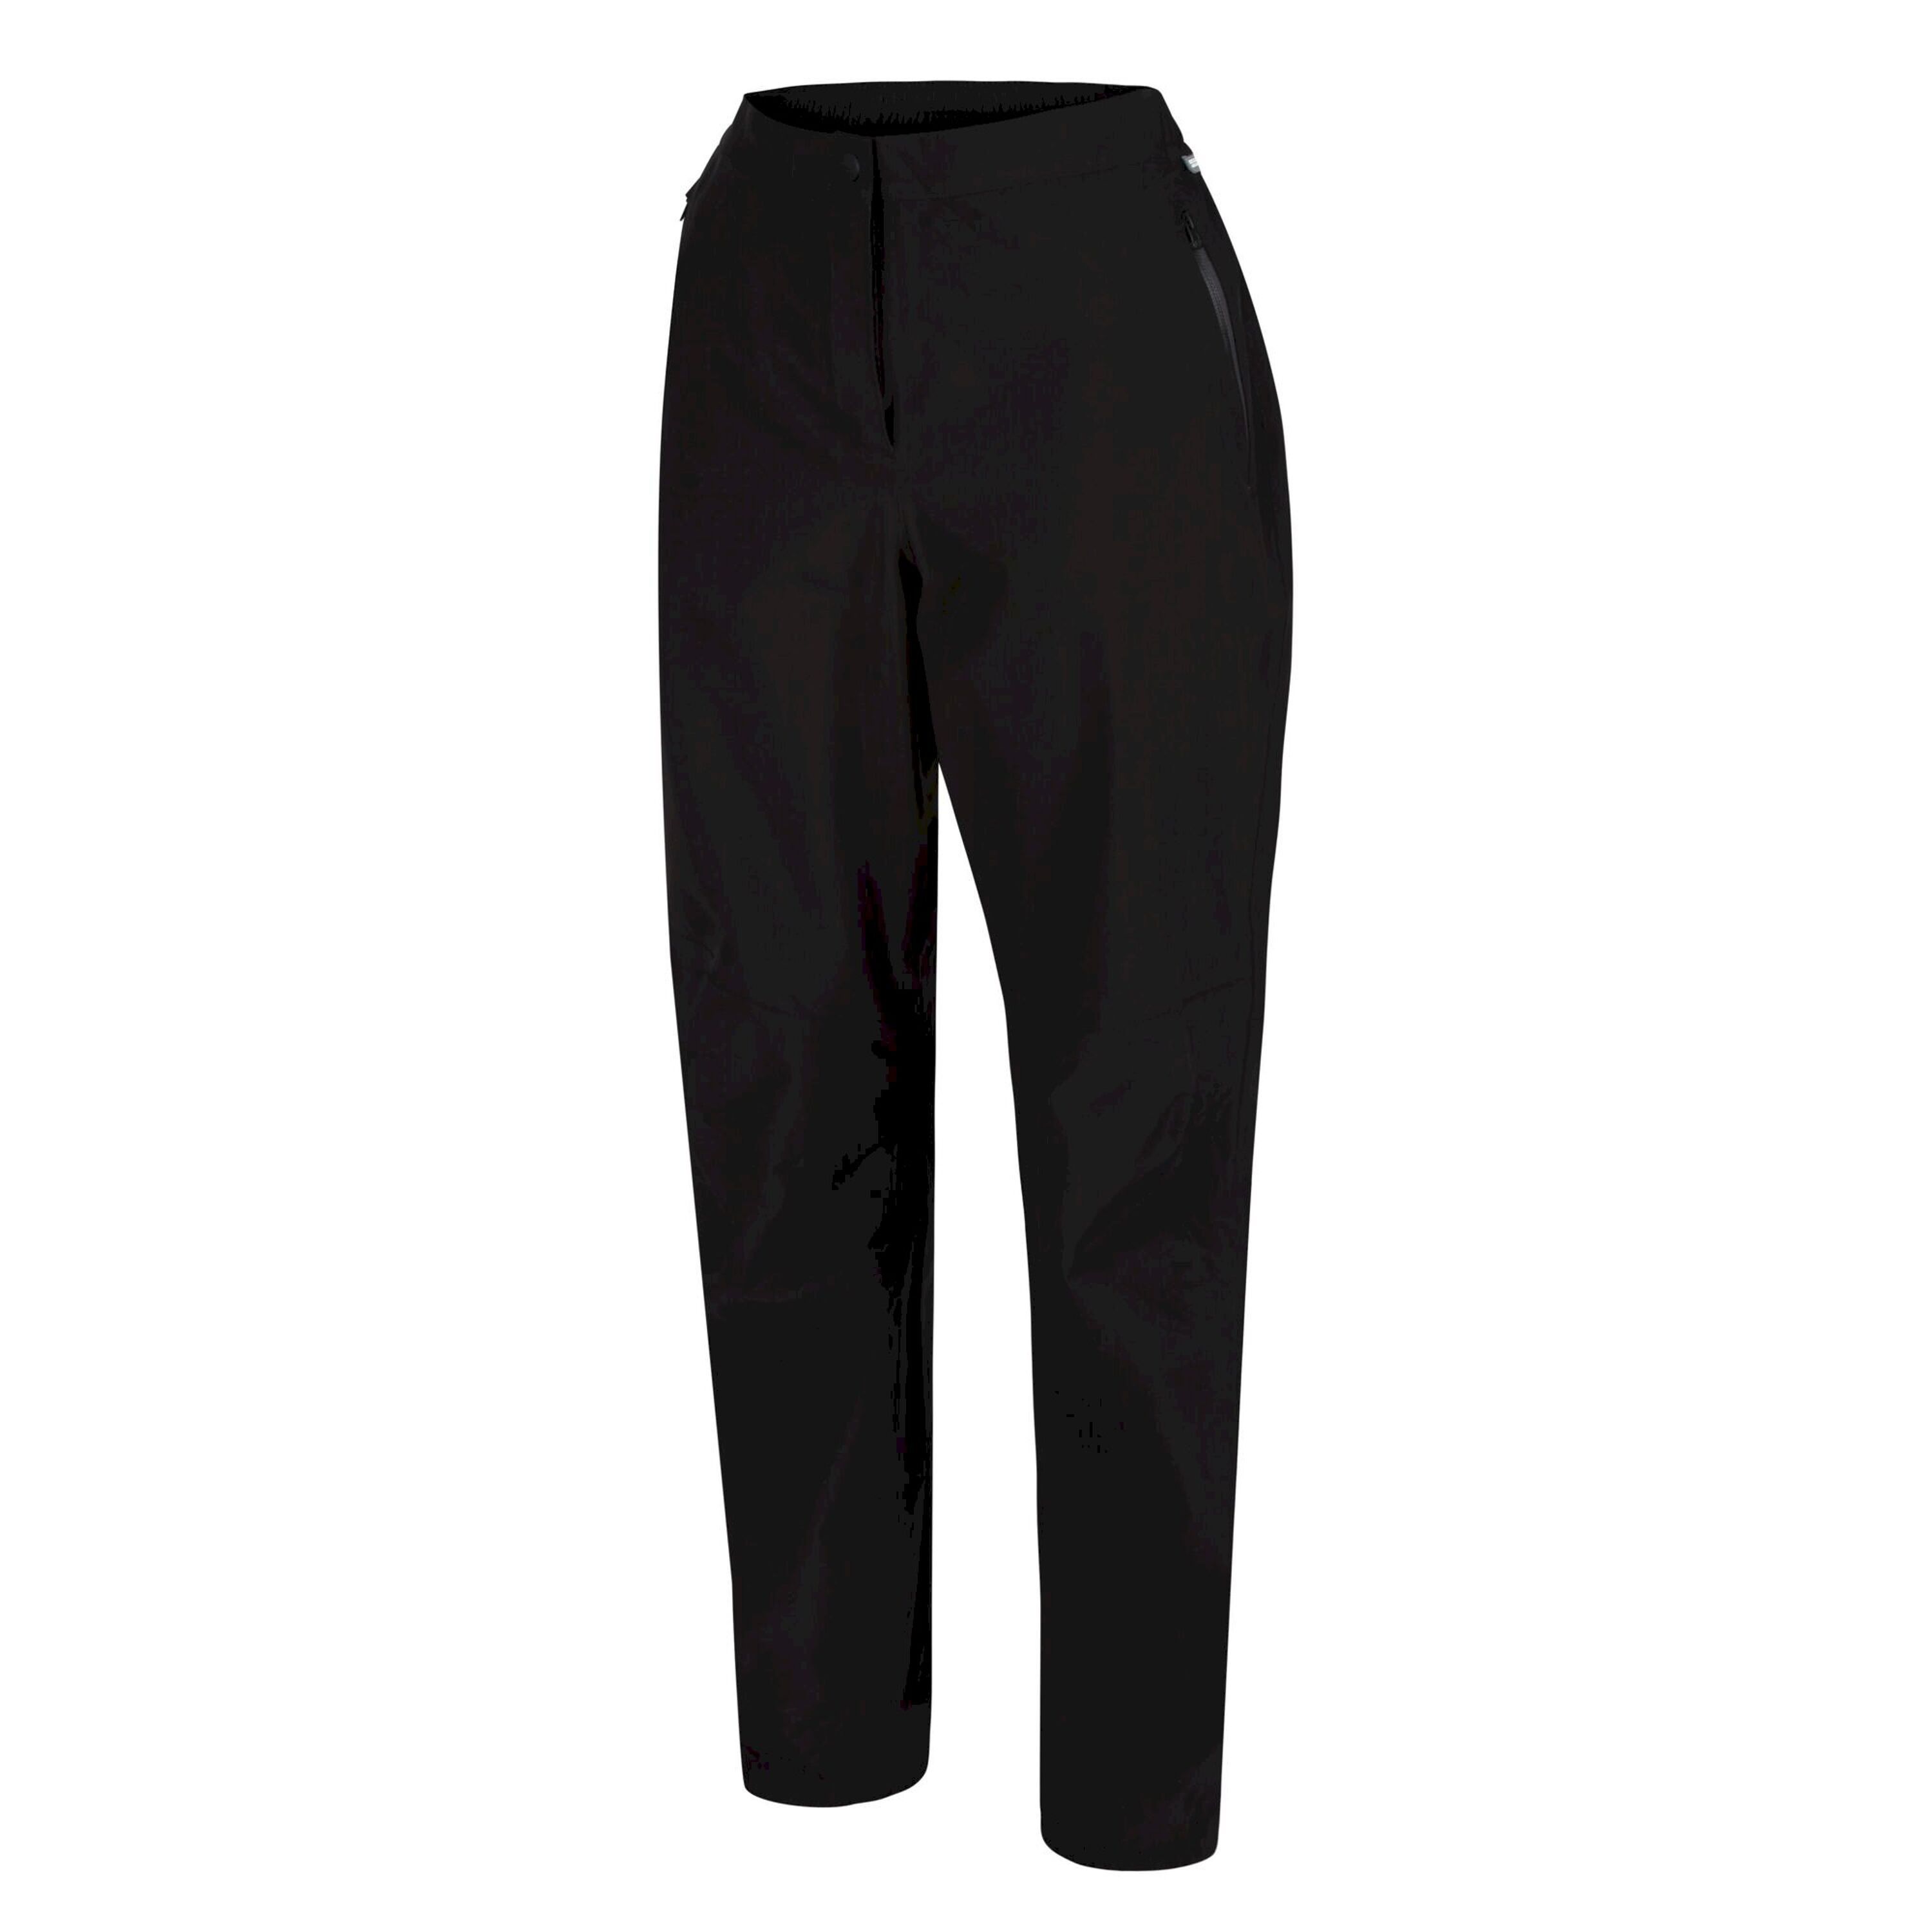 Share more than 80 ladies waterproof trousers super hot - in.duhocakina